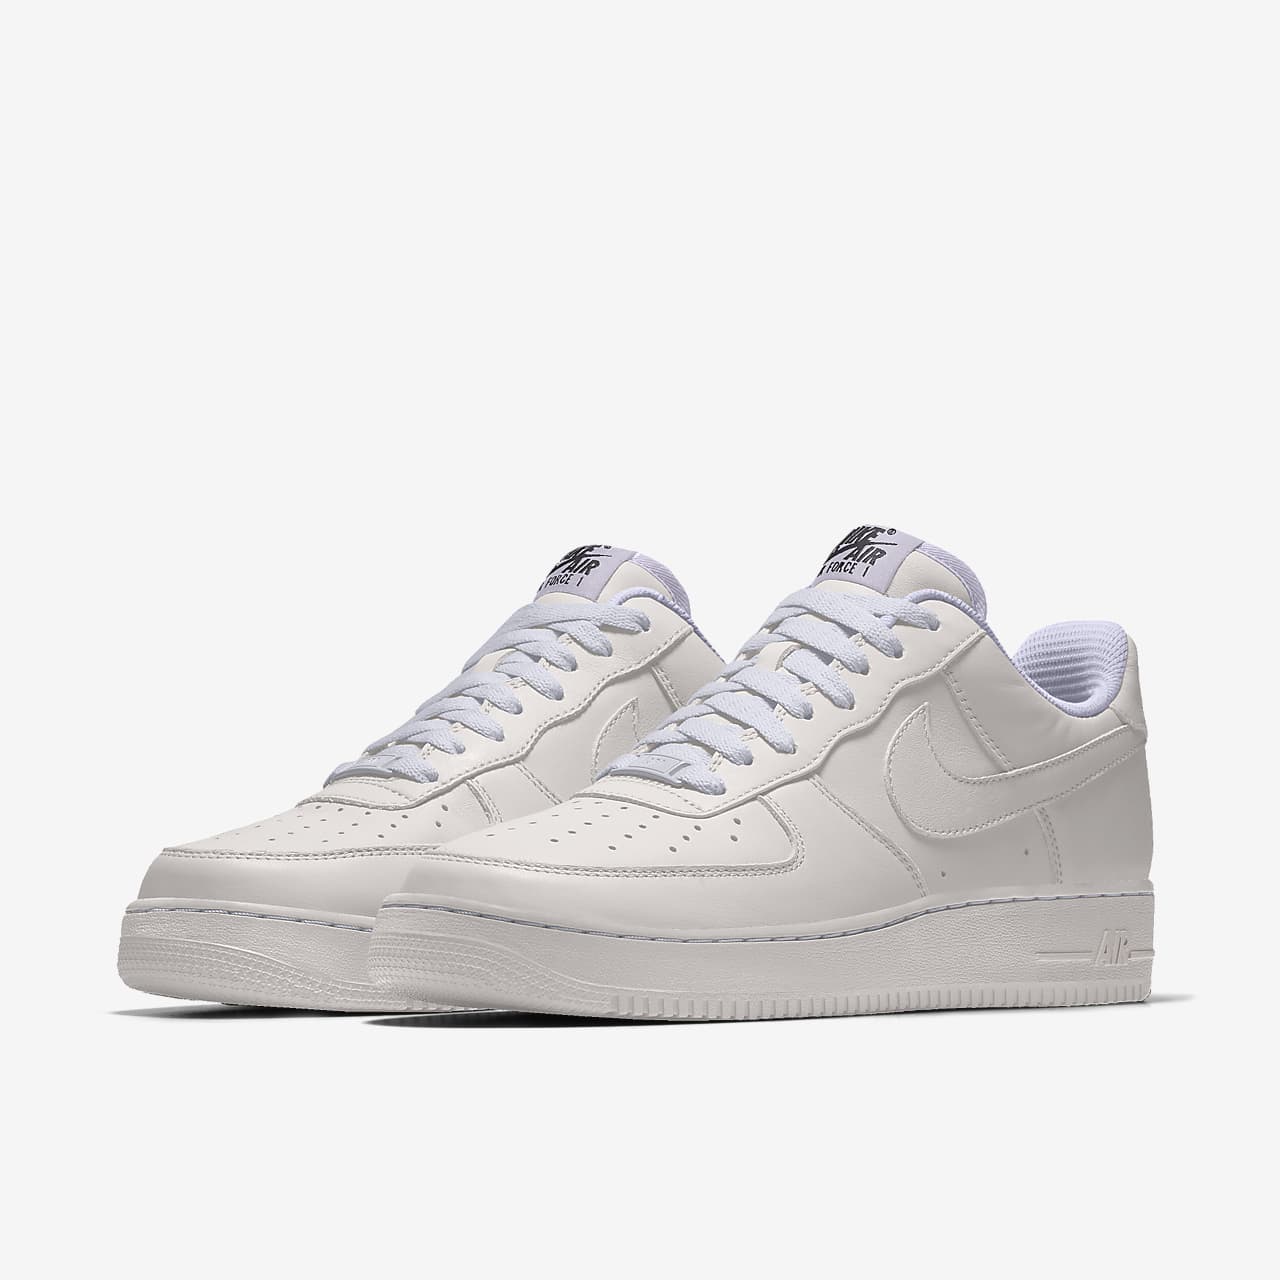 nike by you air force 1 low